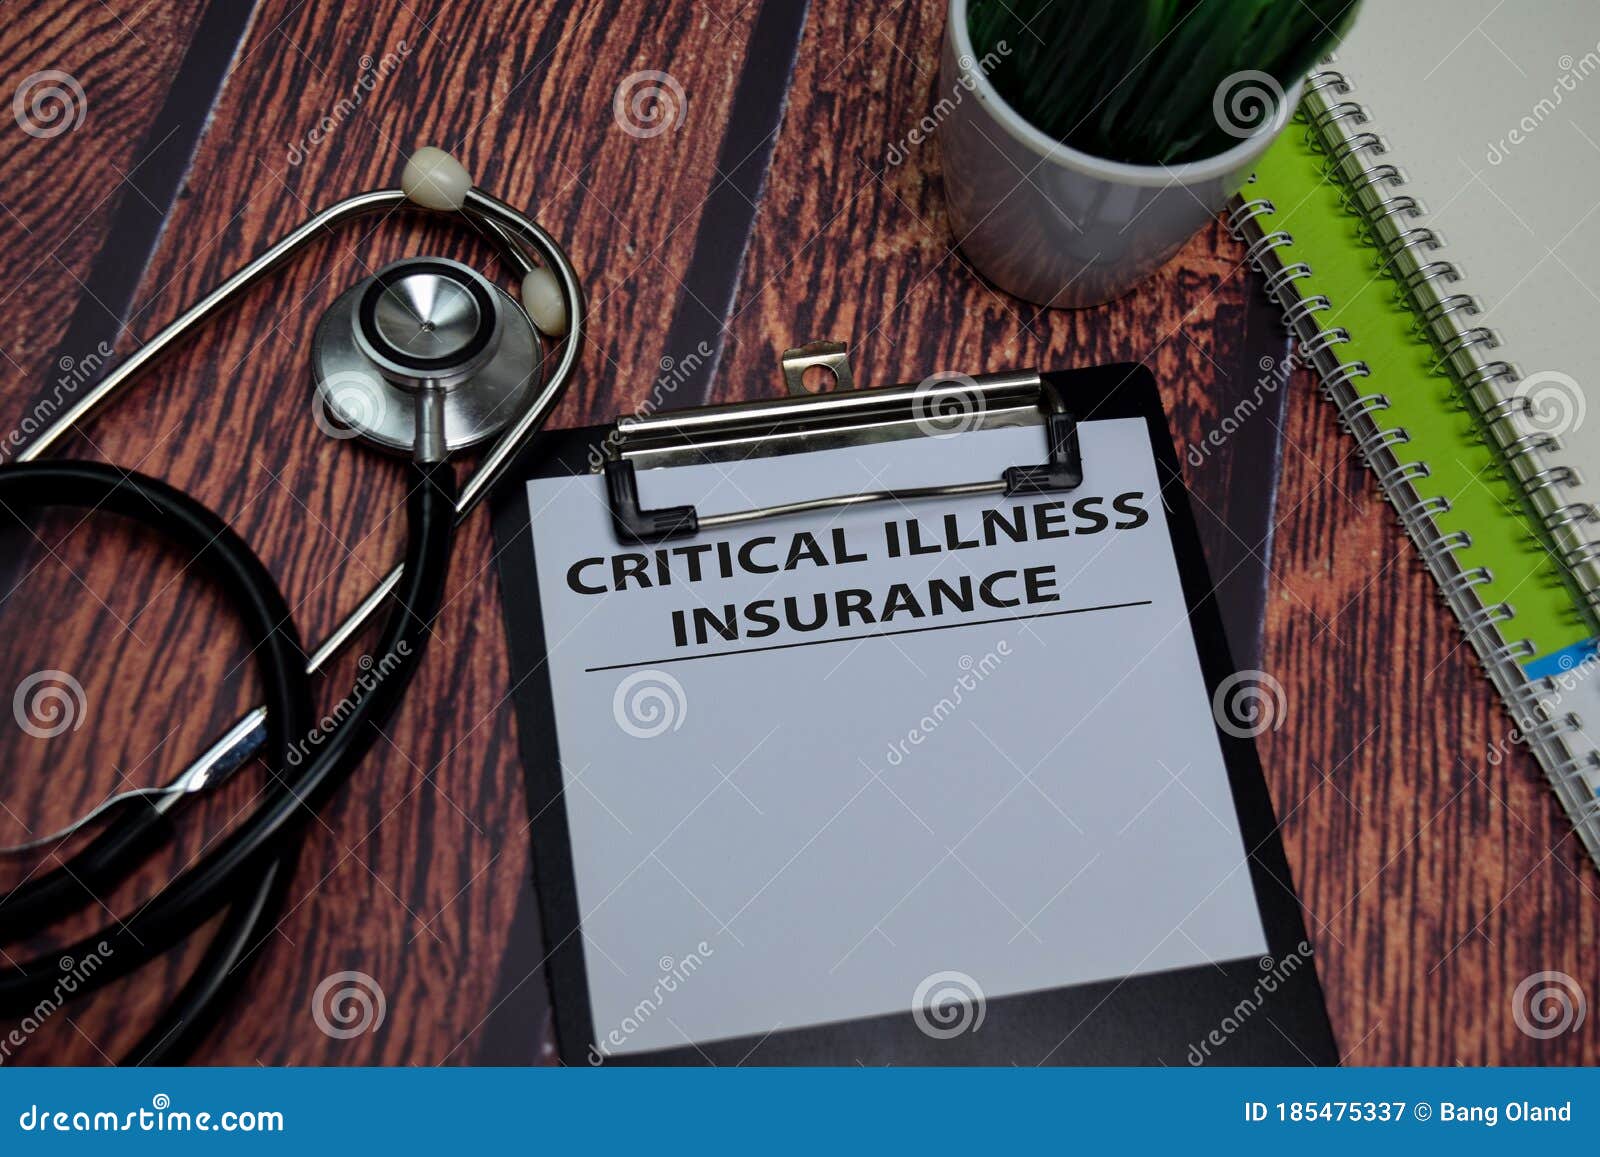 critical illness insurance write on paperwork  on wooden table